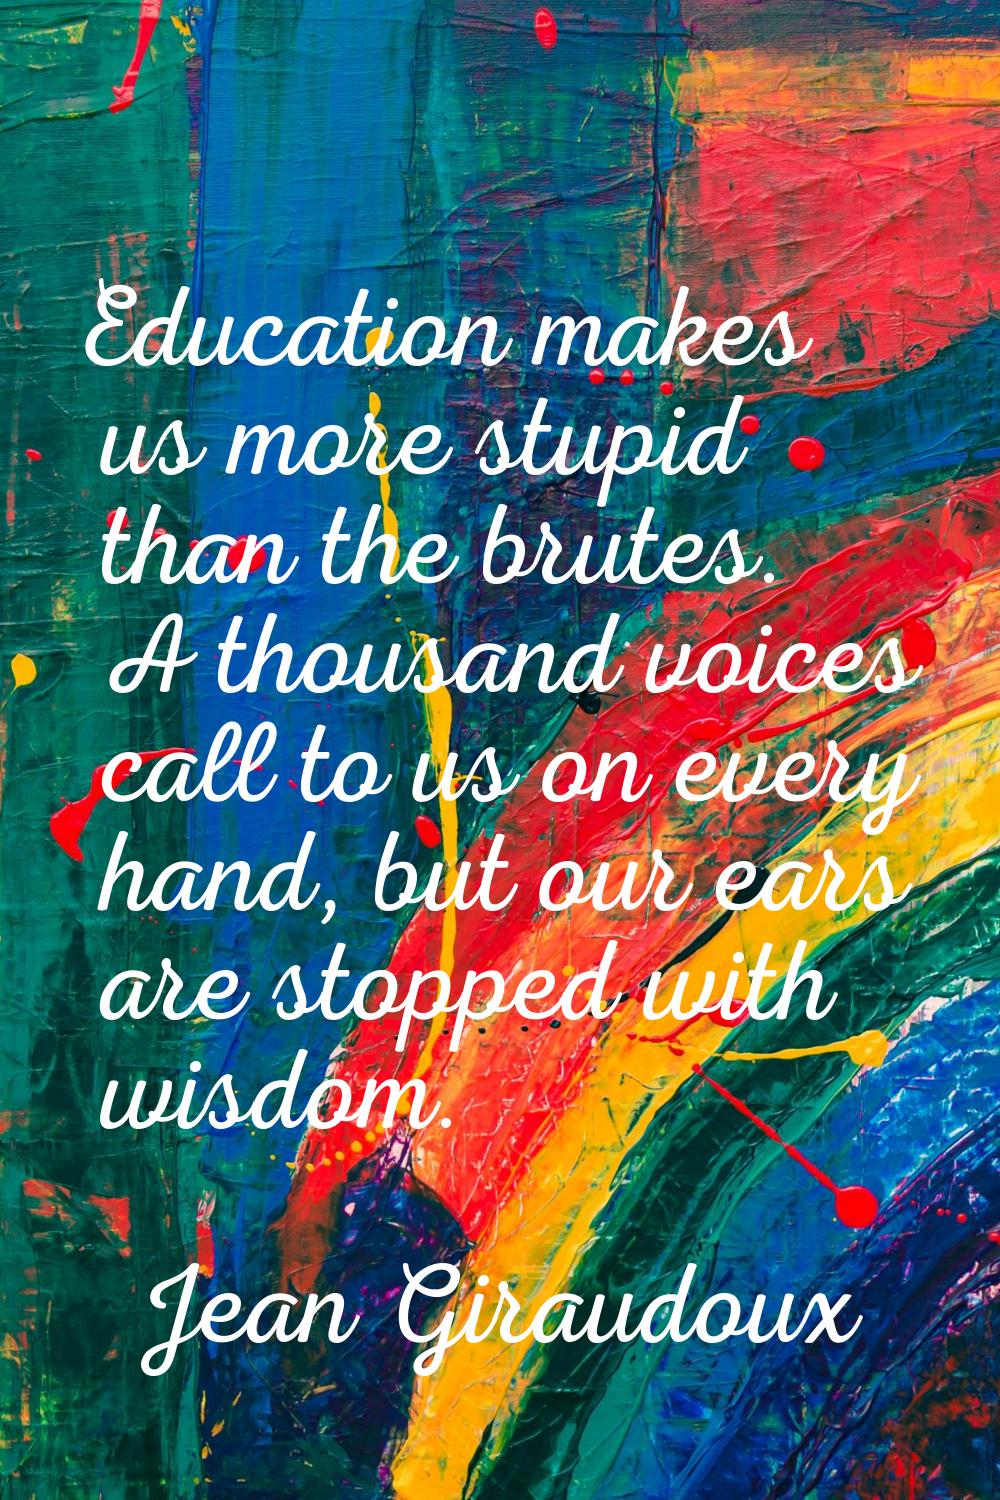 Education makes us more stupid than the brutes. A thousand voices call to us on every hand, but our